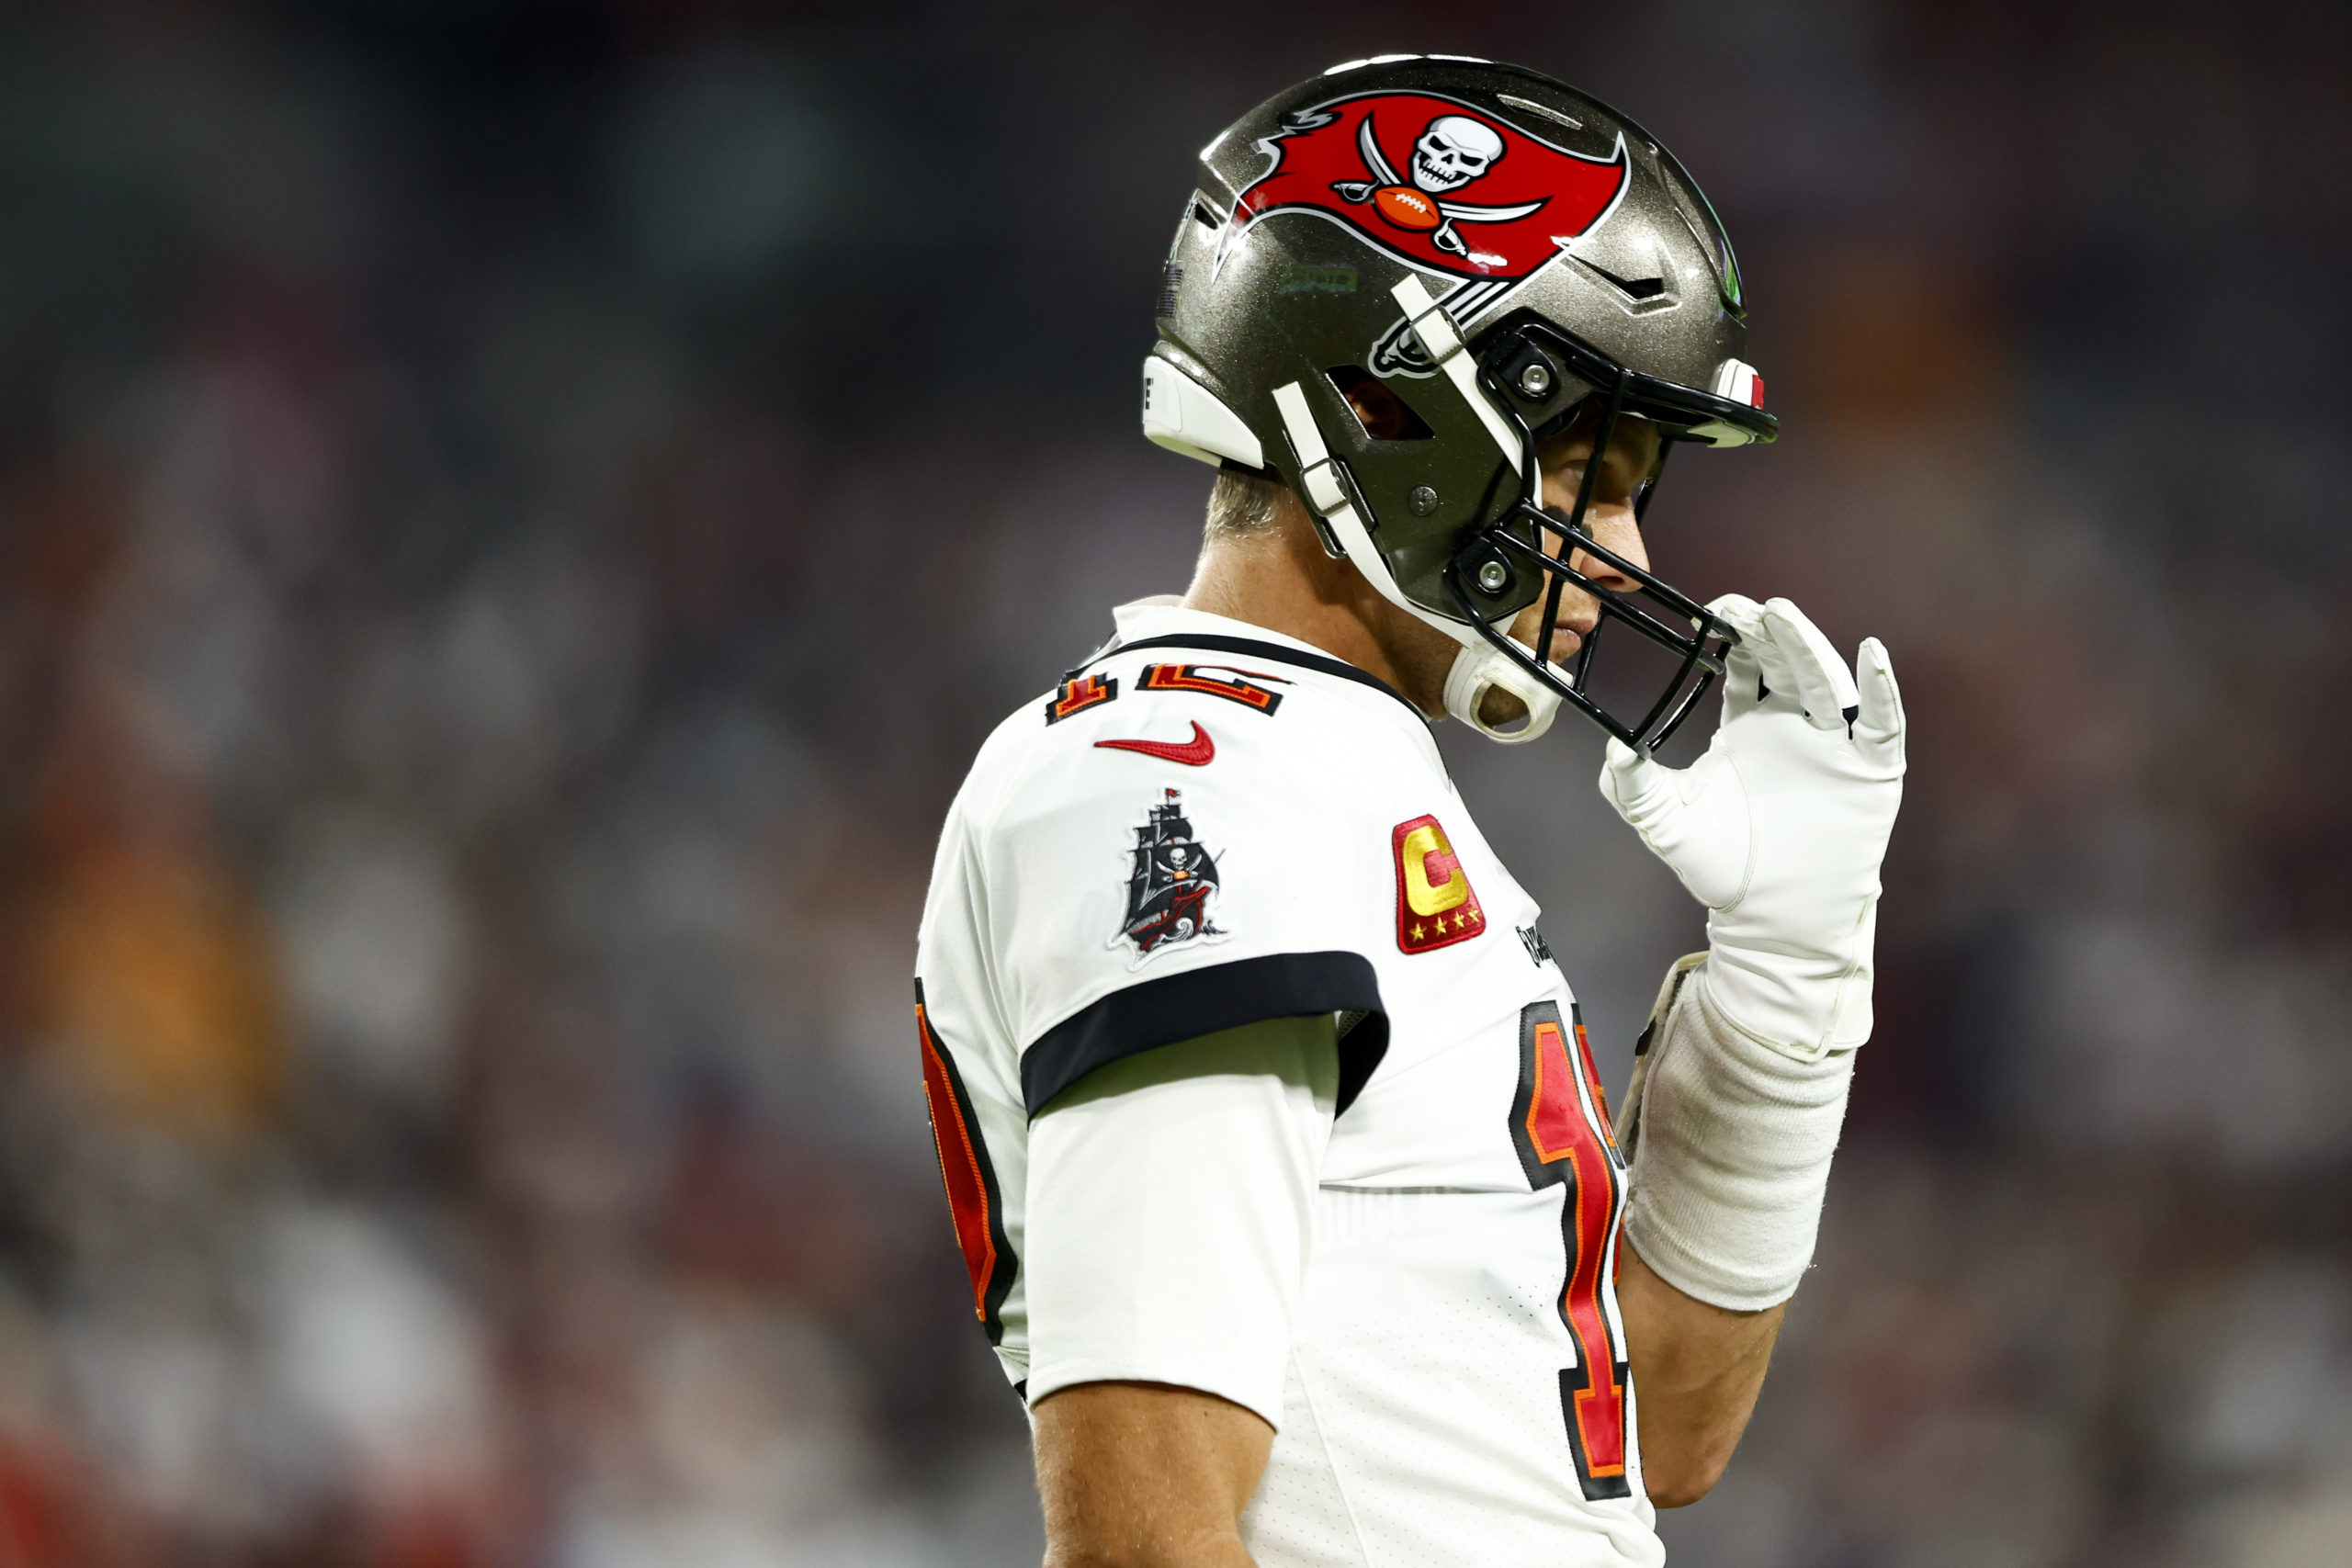 TAMPA, FL - JANUARY 16: Tom Brady #12 of the Tampa Bay Buccaneers adjusts his helmet during the third quarter of an NFL wild card playoff football game against the Dallas Cowboys at Raymond James Stadium on January 16, 2023 in Tampa, Florida. (Photo by Kevin Sabitus/Getty Images)